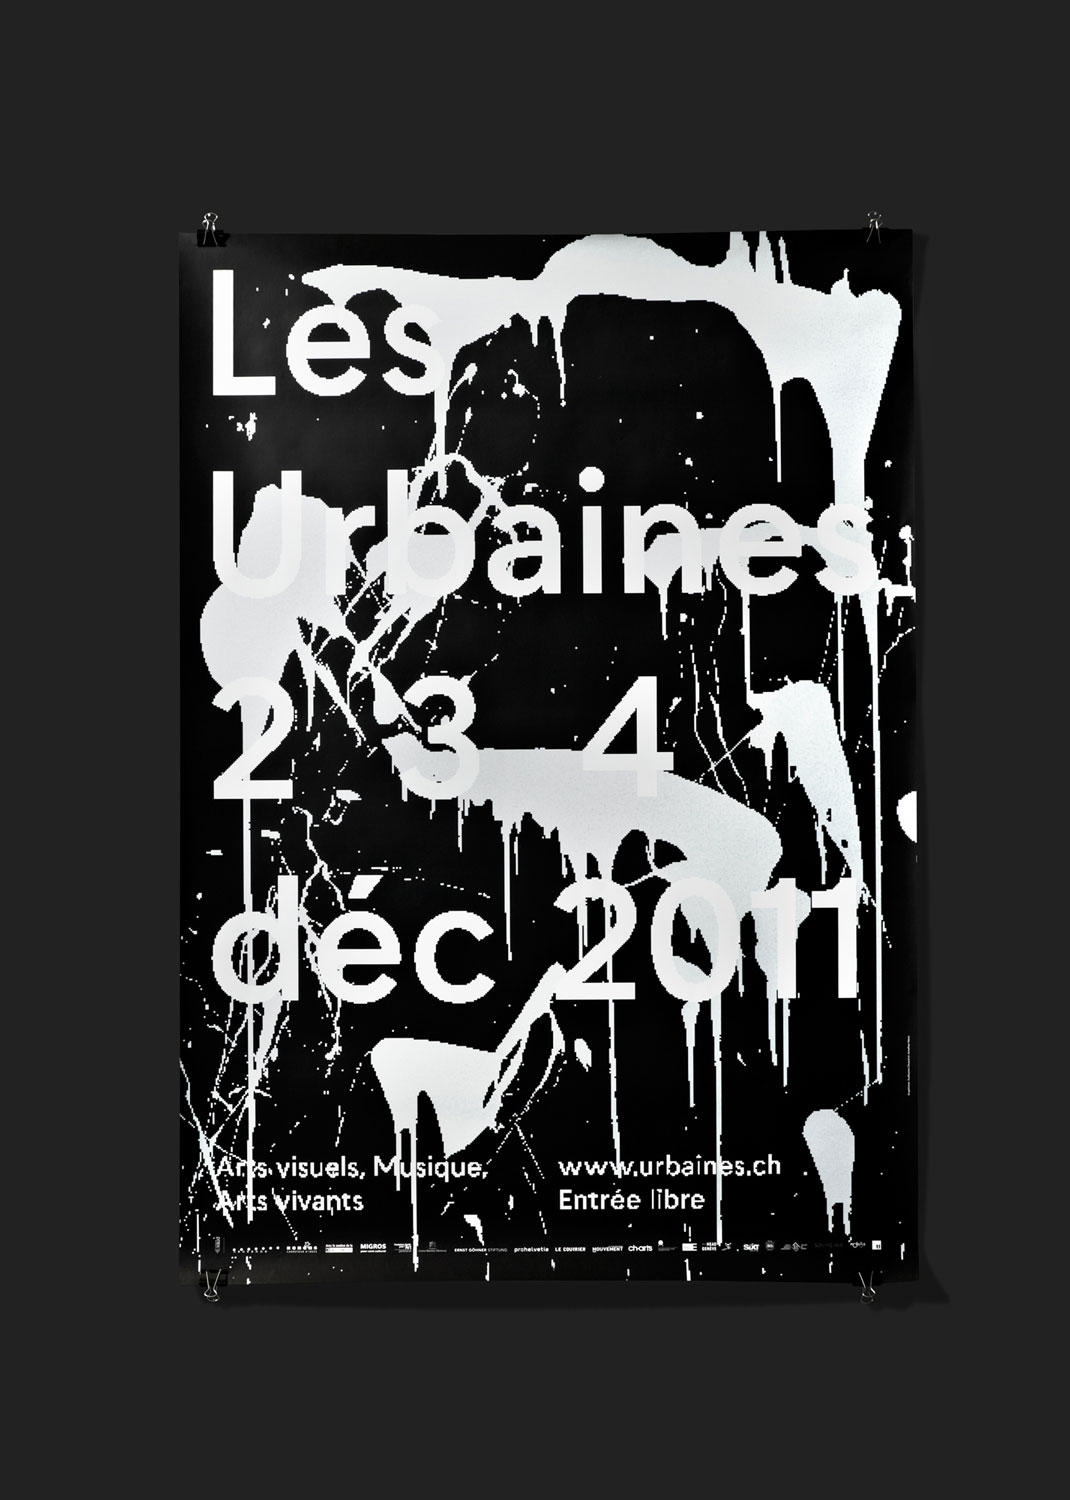 Visual identity and communication for the festival Les Urbaines in Lausanne (editions 2010 & 2011)